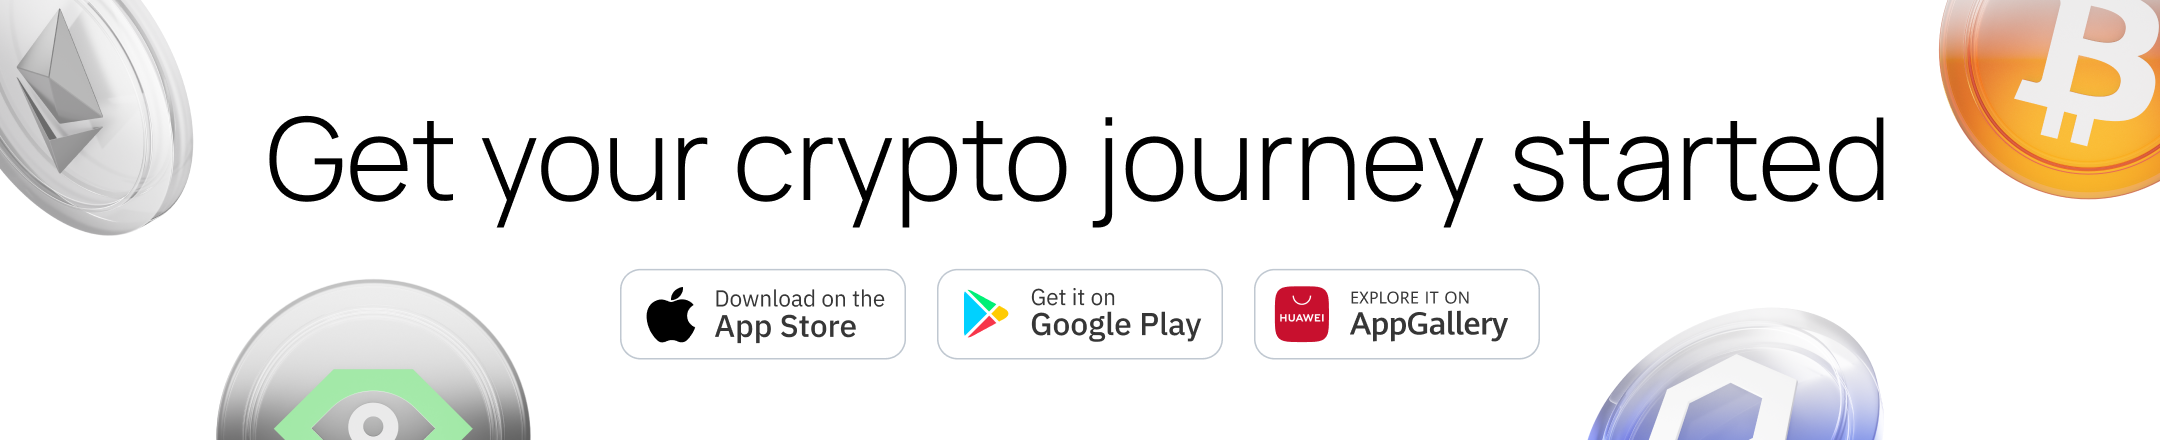 Get your crypto journey started - footer (1).png